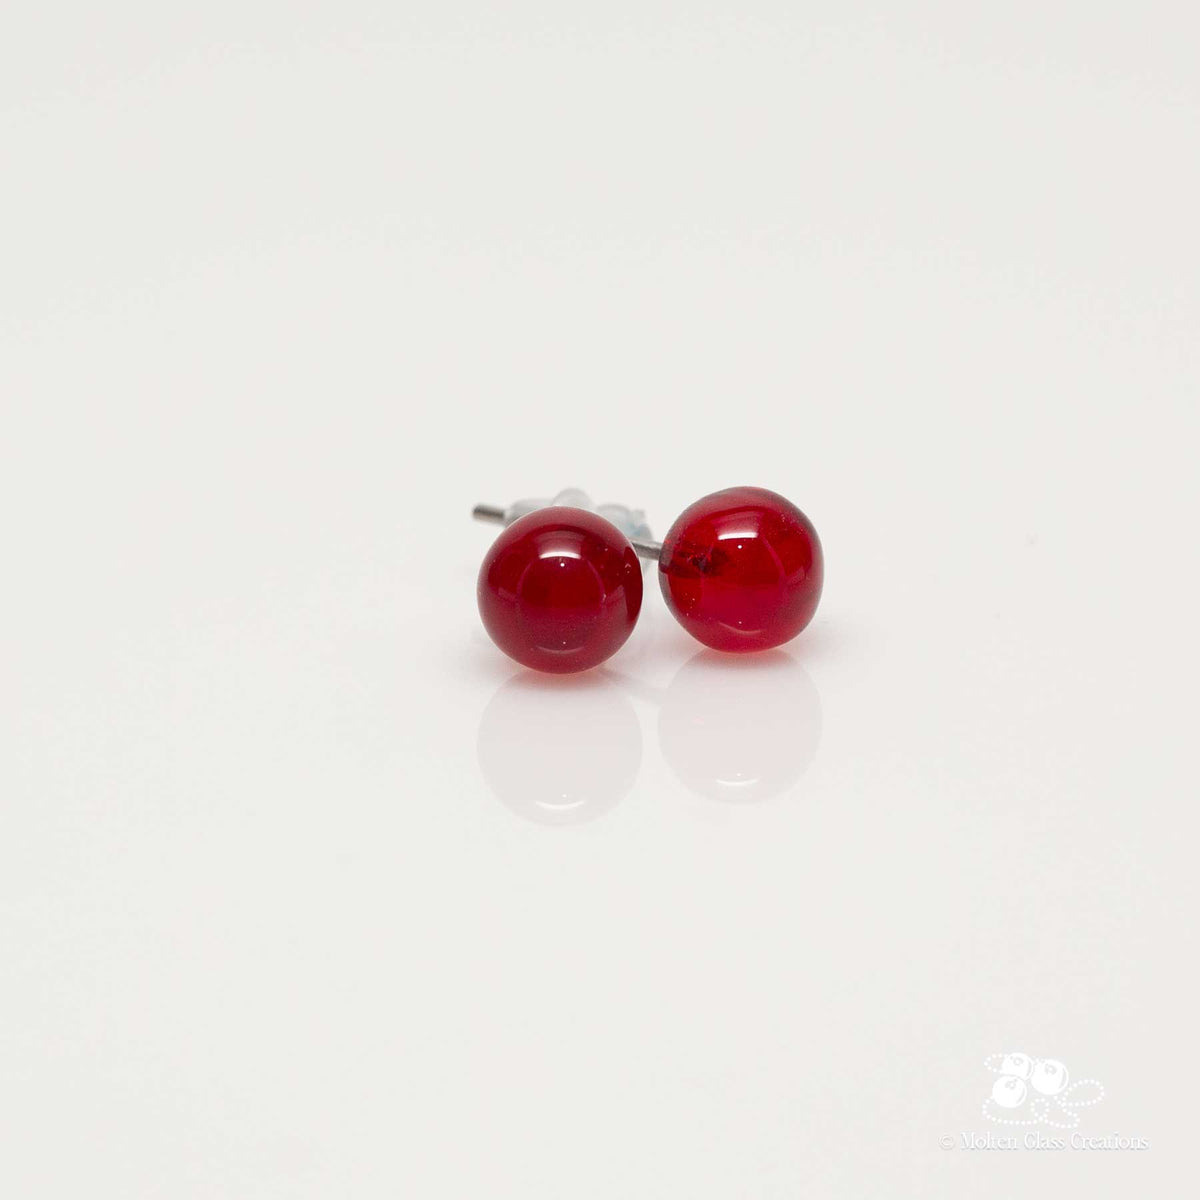 Glass Stud Earrings - Red Round